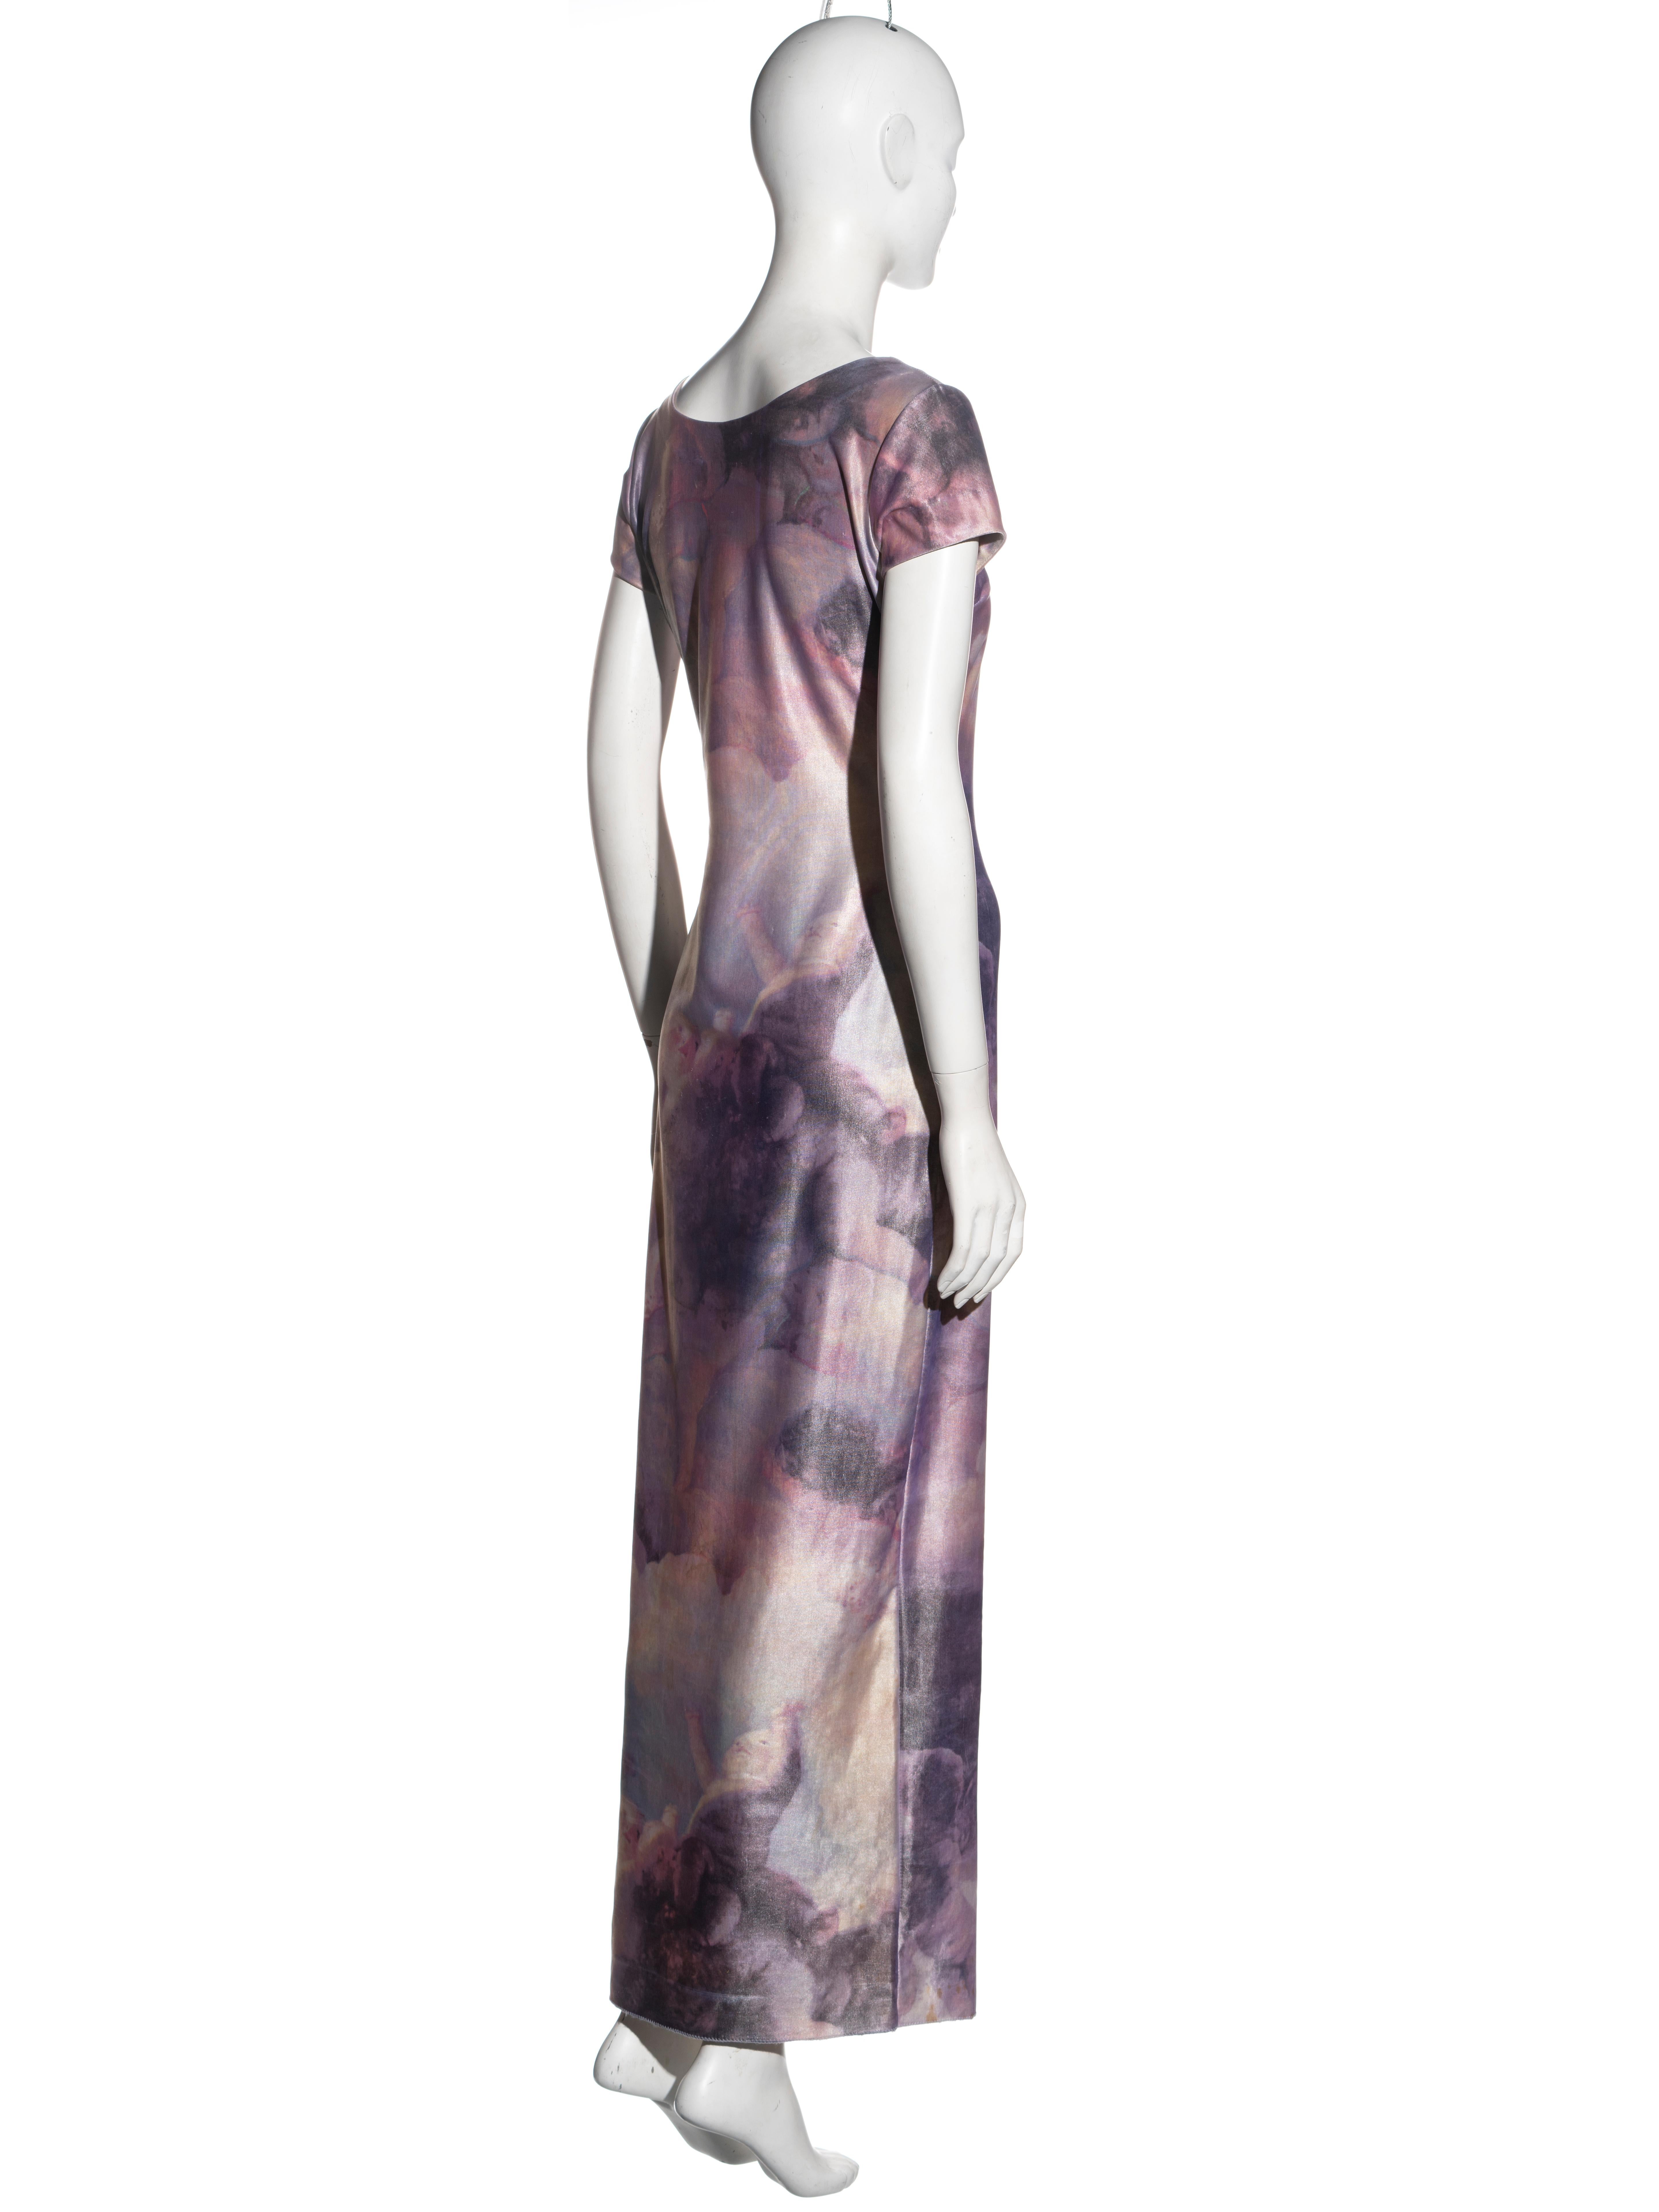 Vivienne Westwood evening maxi dress with cupid print, fw 1991 For Sale 2